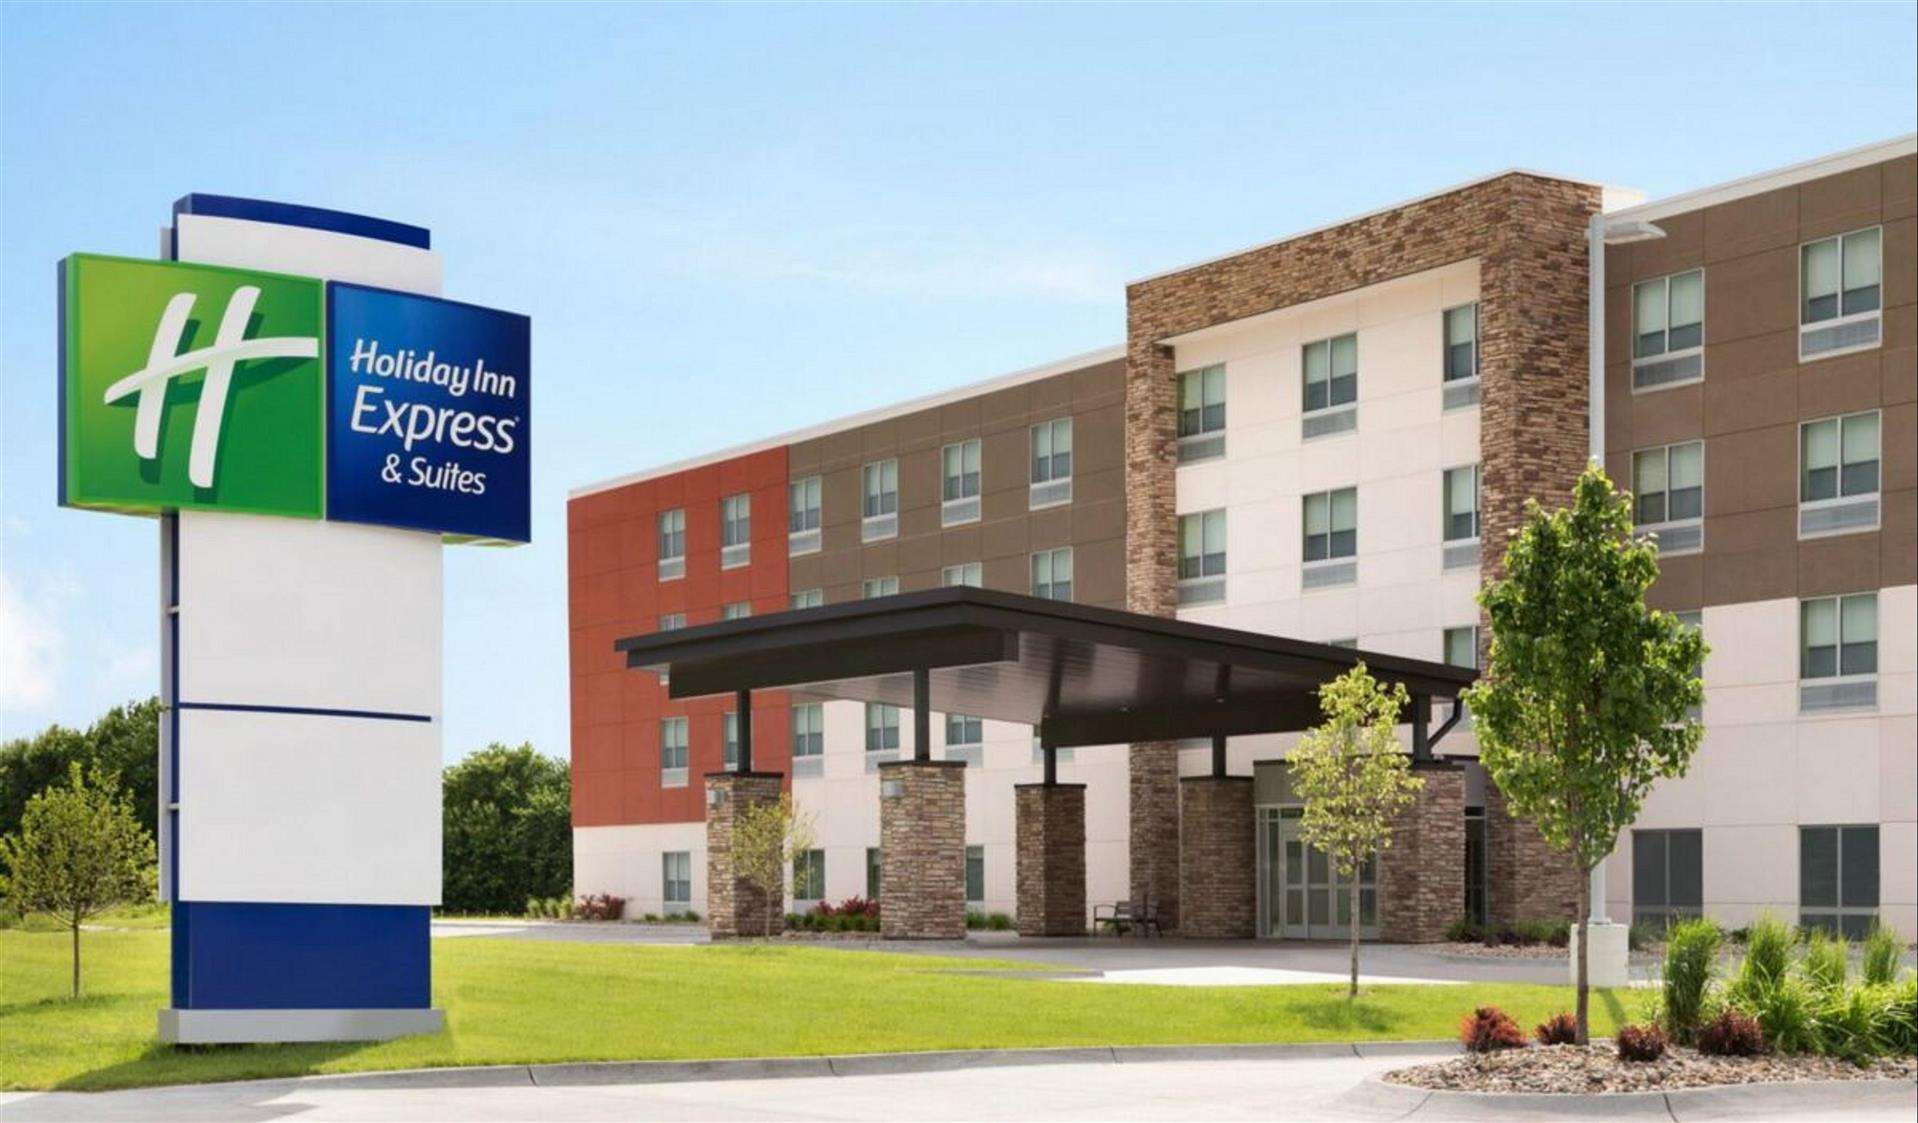 Holiday Inn Express & Suites San Jose – Silicon Valley in San Jose, CA